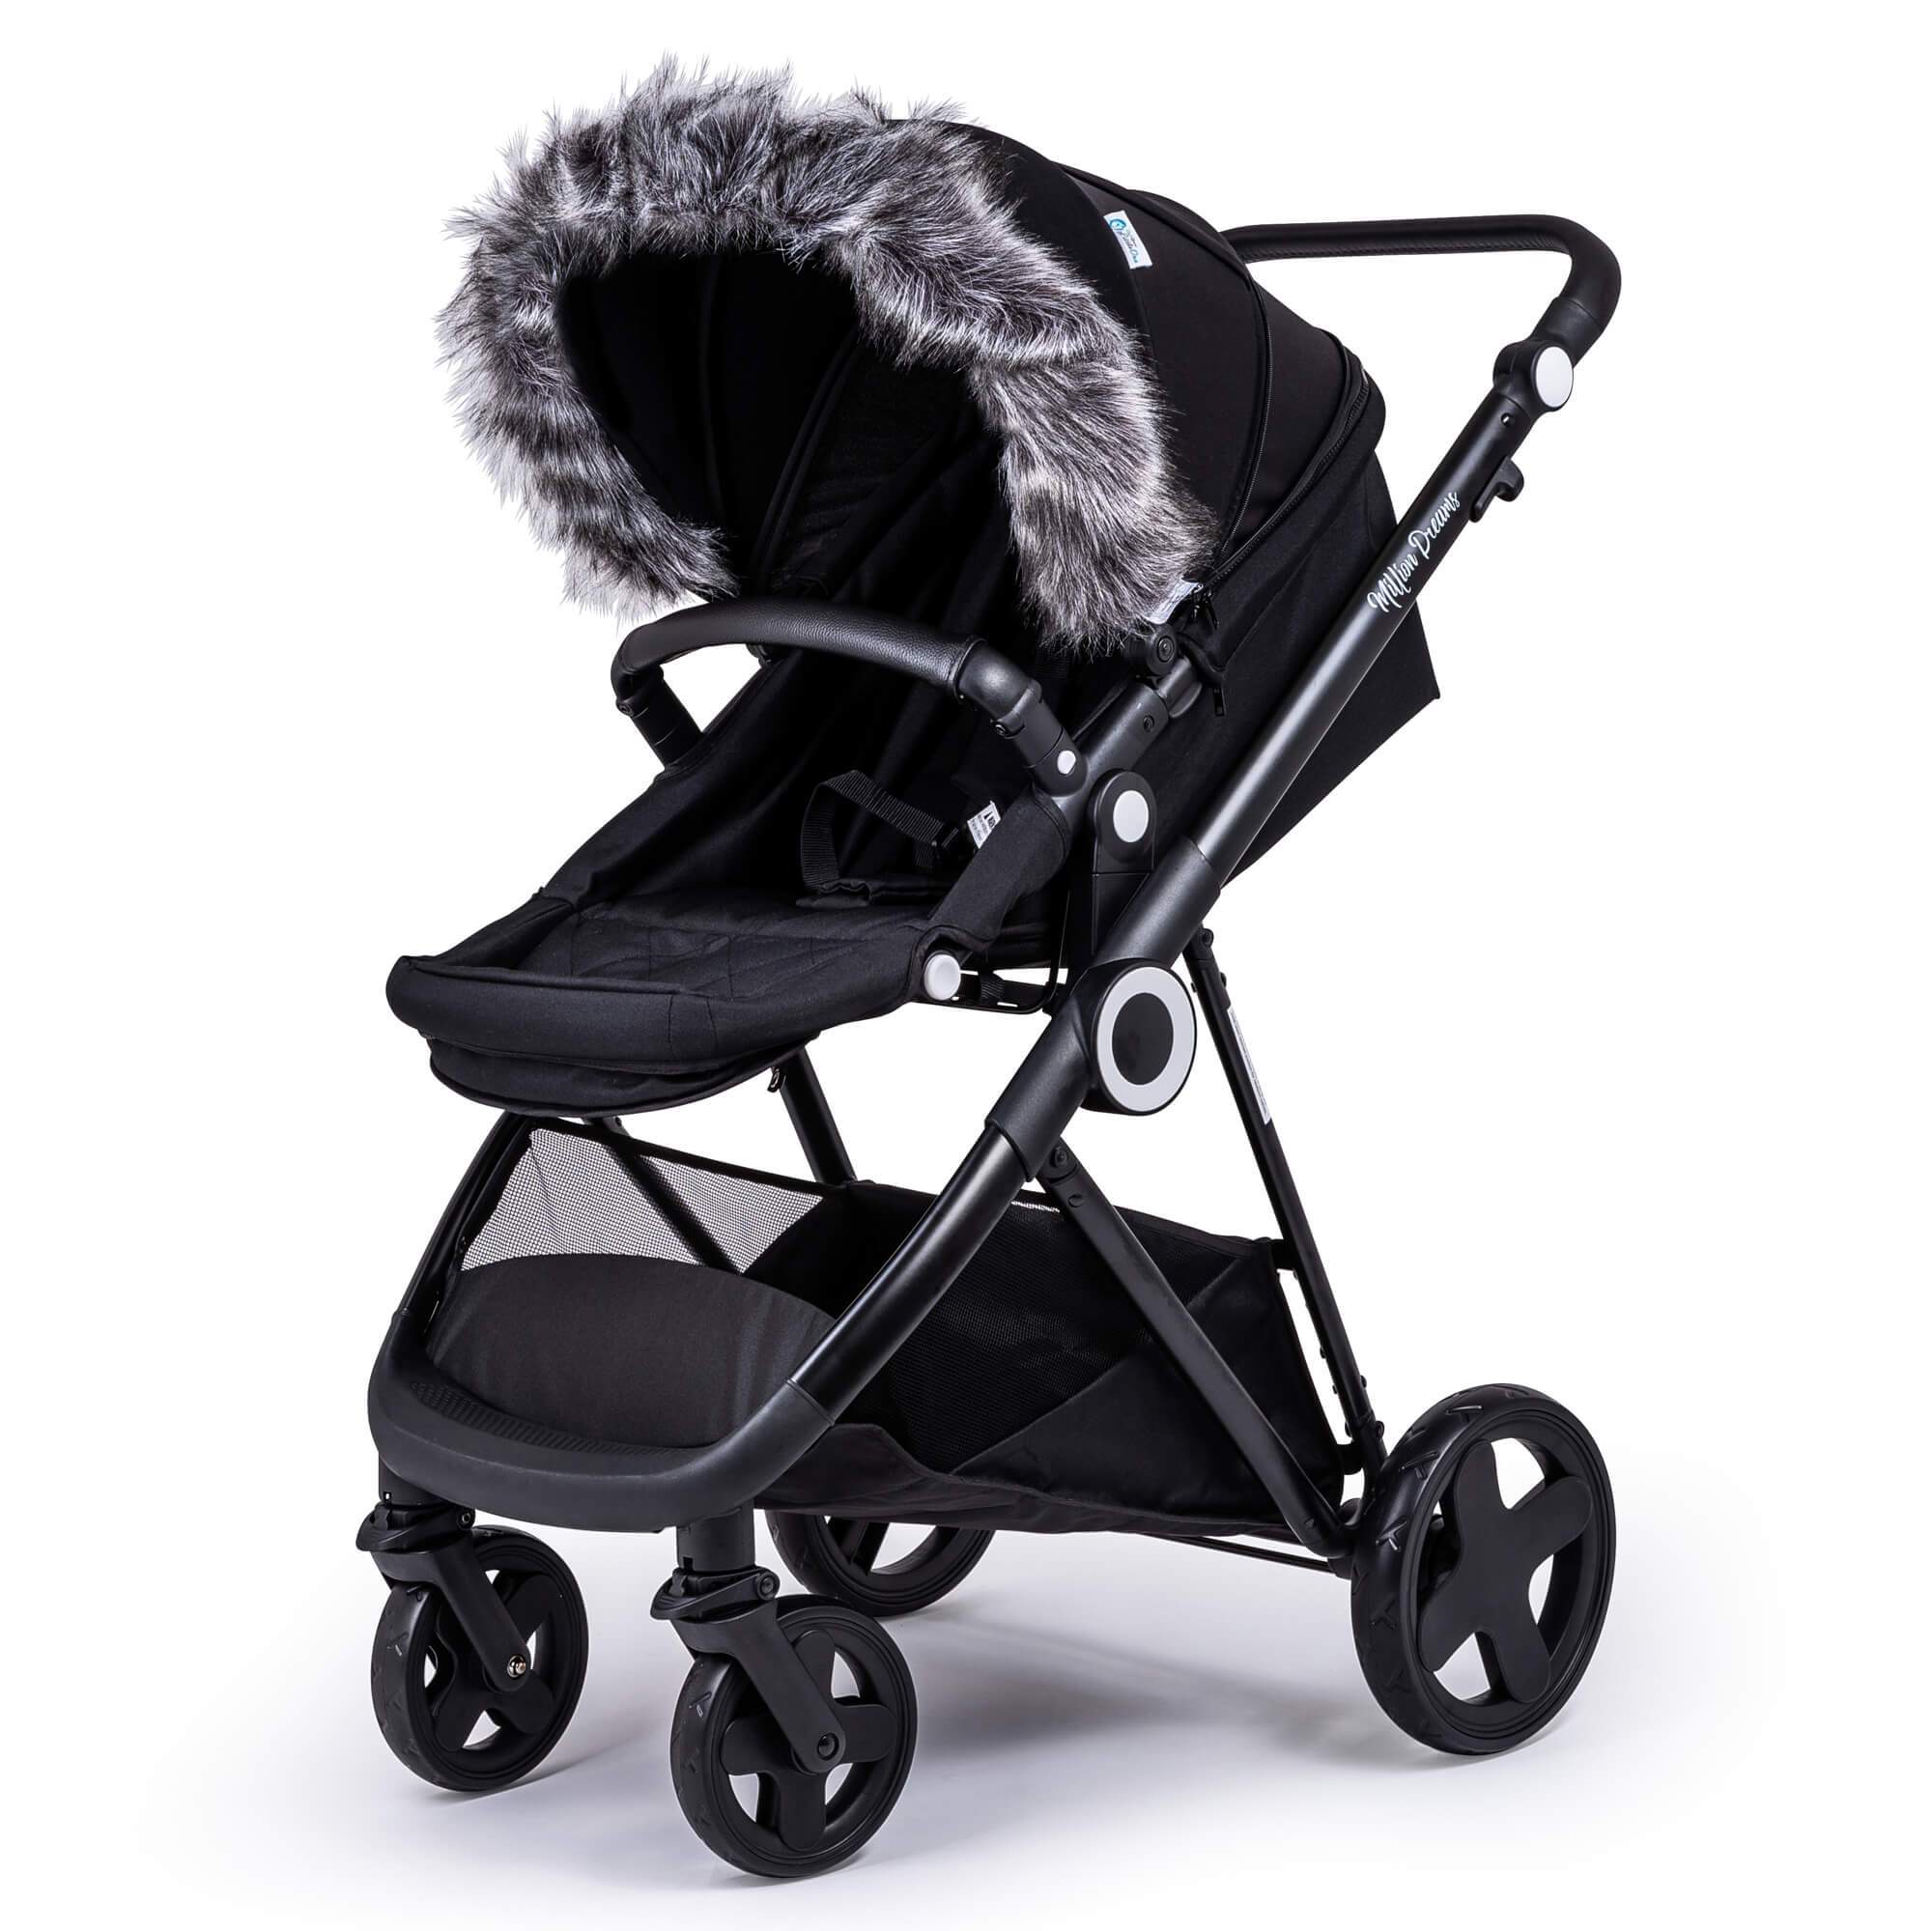 Pram Fur Hood Trim Attachment for Pushchair Compatible with Babybus - Dark Grey / Fits All Models | For Your Little One